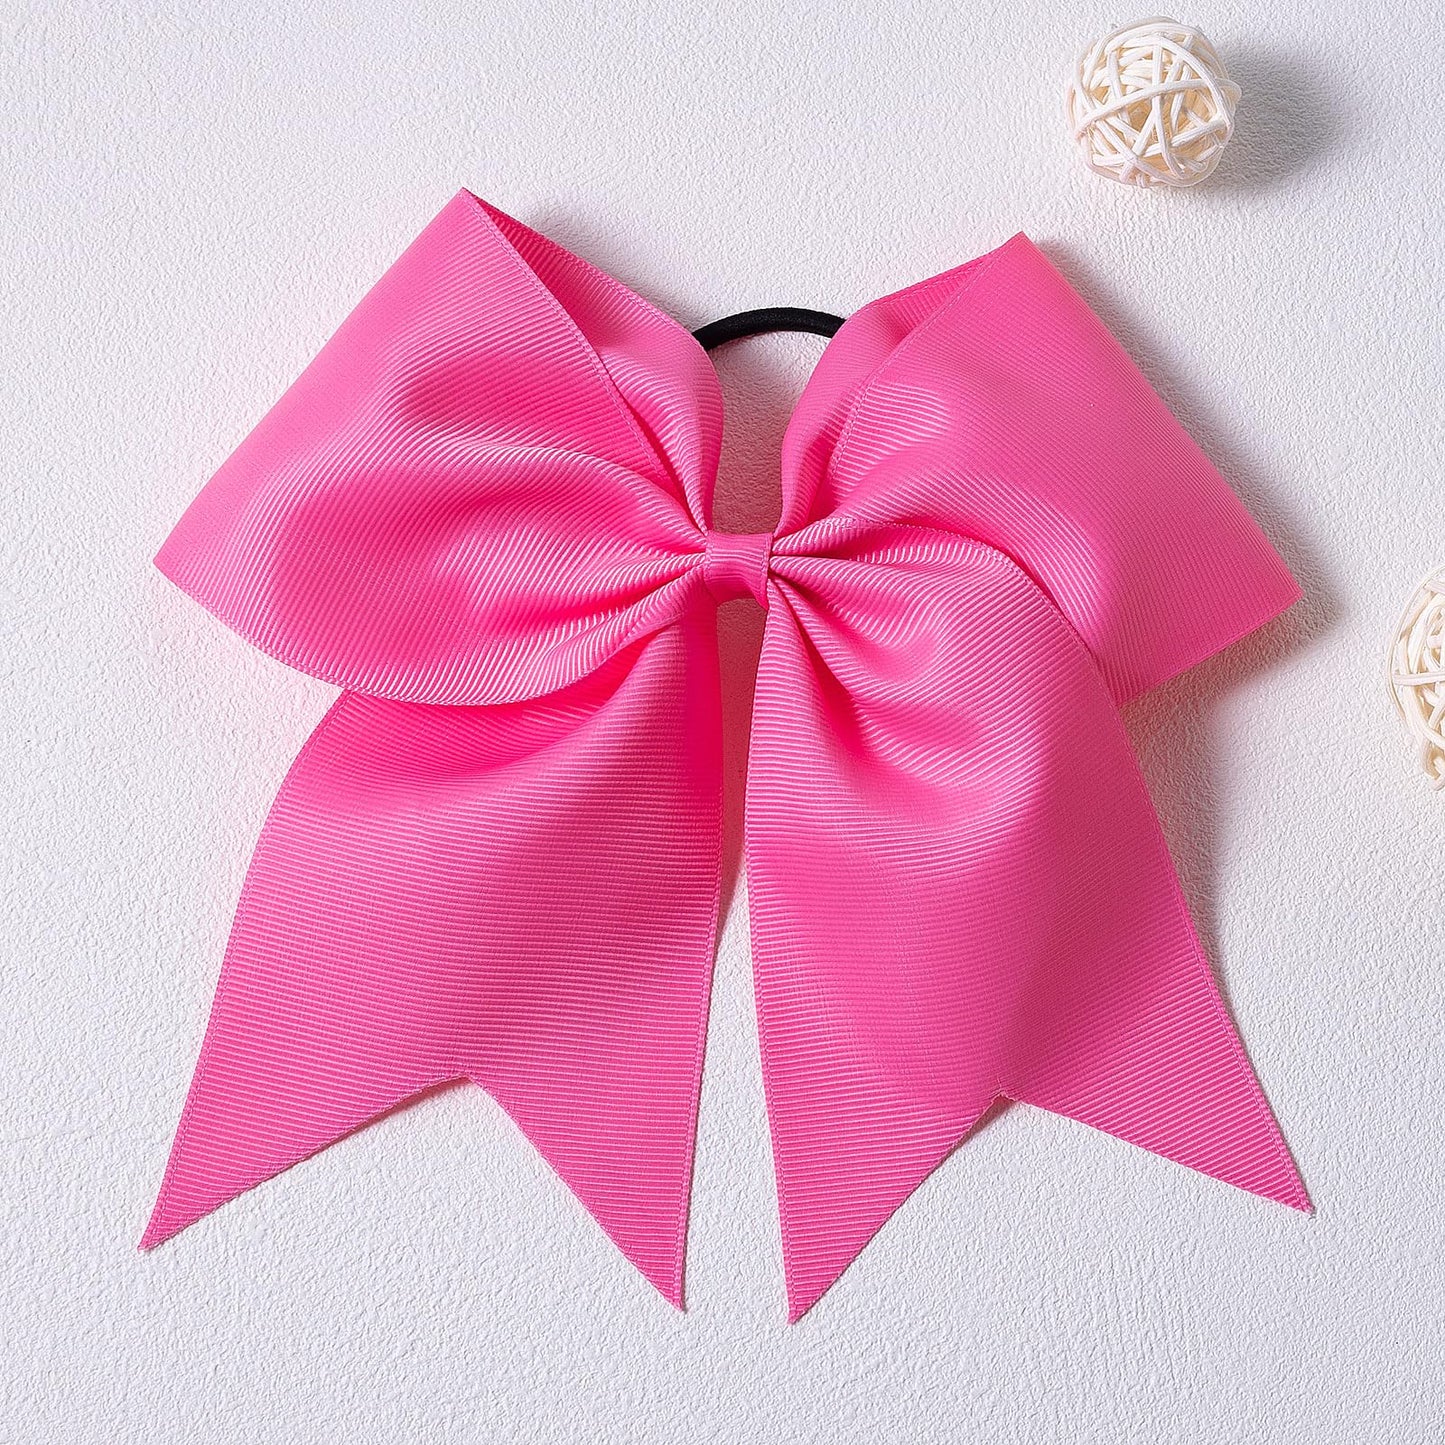 7" Big Hair Bows School Cheer Team Hair Styling Accessories, Gift Hair Bows Hair Clip for Mom Teen Toddler Girl Stuff, Back to School Outfits, Ponytail Holder Elegant Friendship Headdress Decor, Pink